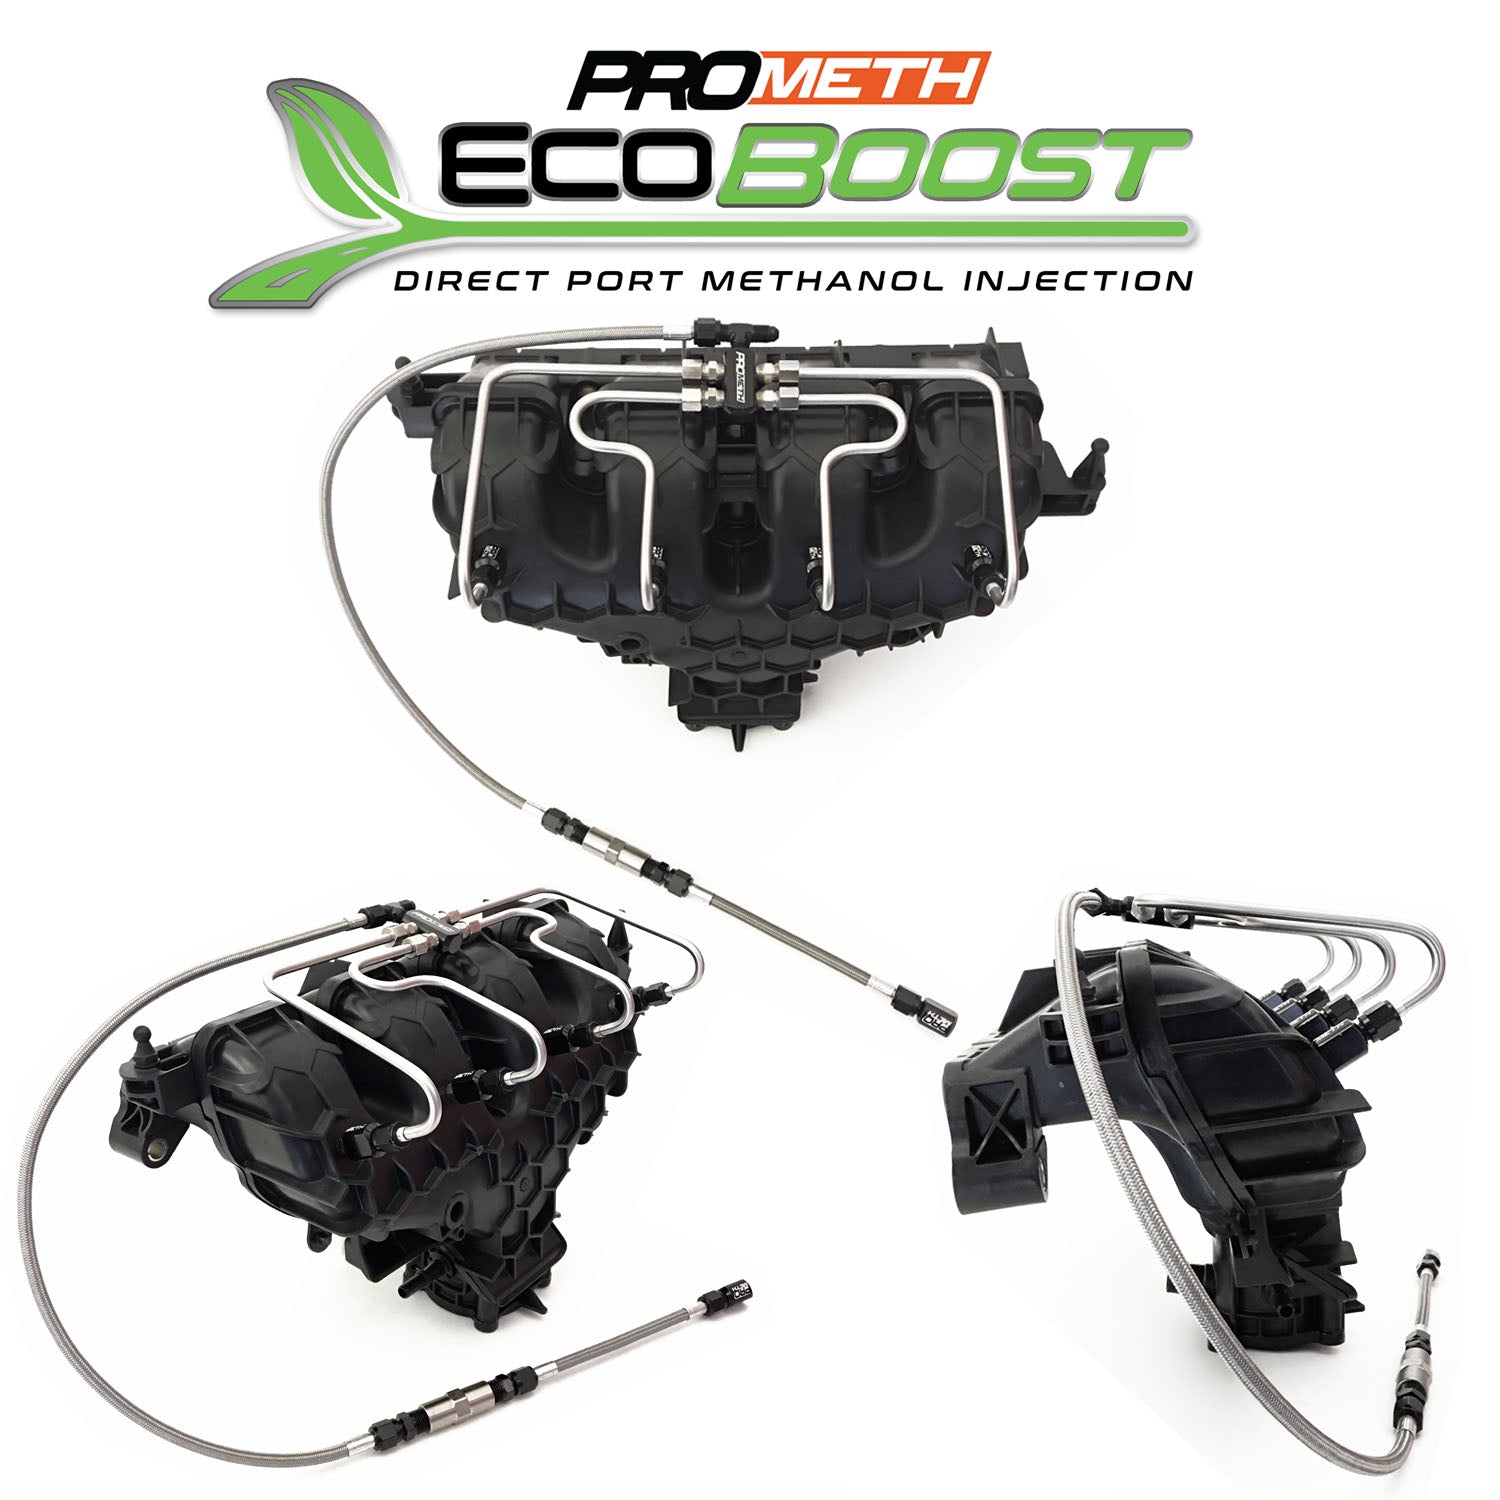 Ford SVT Focus Ecoboost 2.0L Direct Port Methanol Injection With Pre Compressor Injection